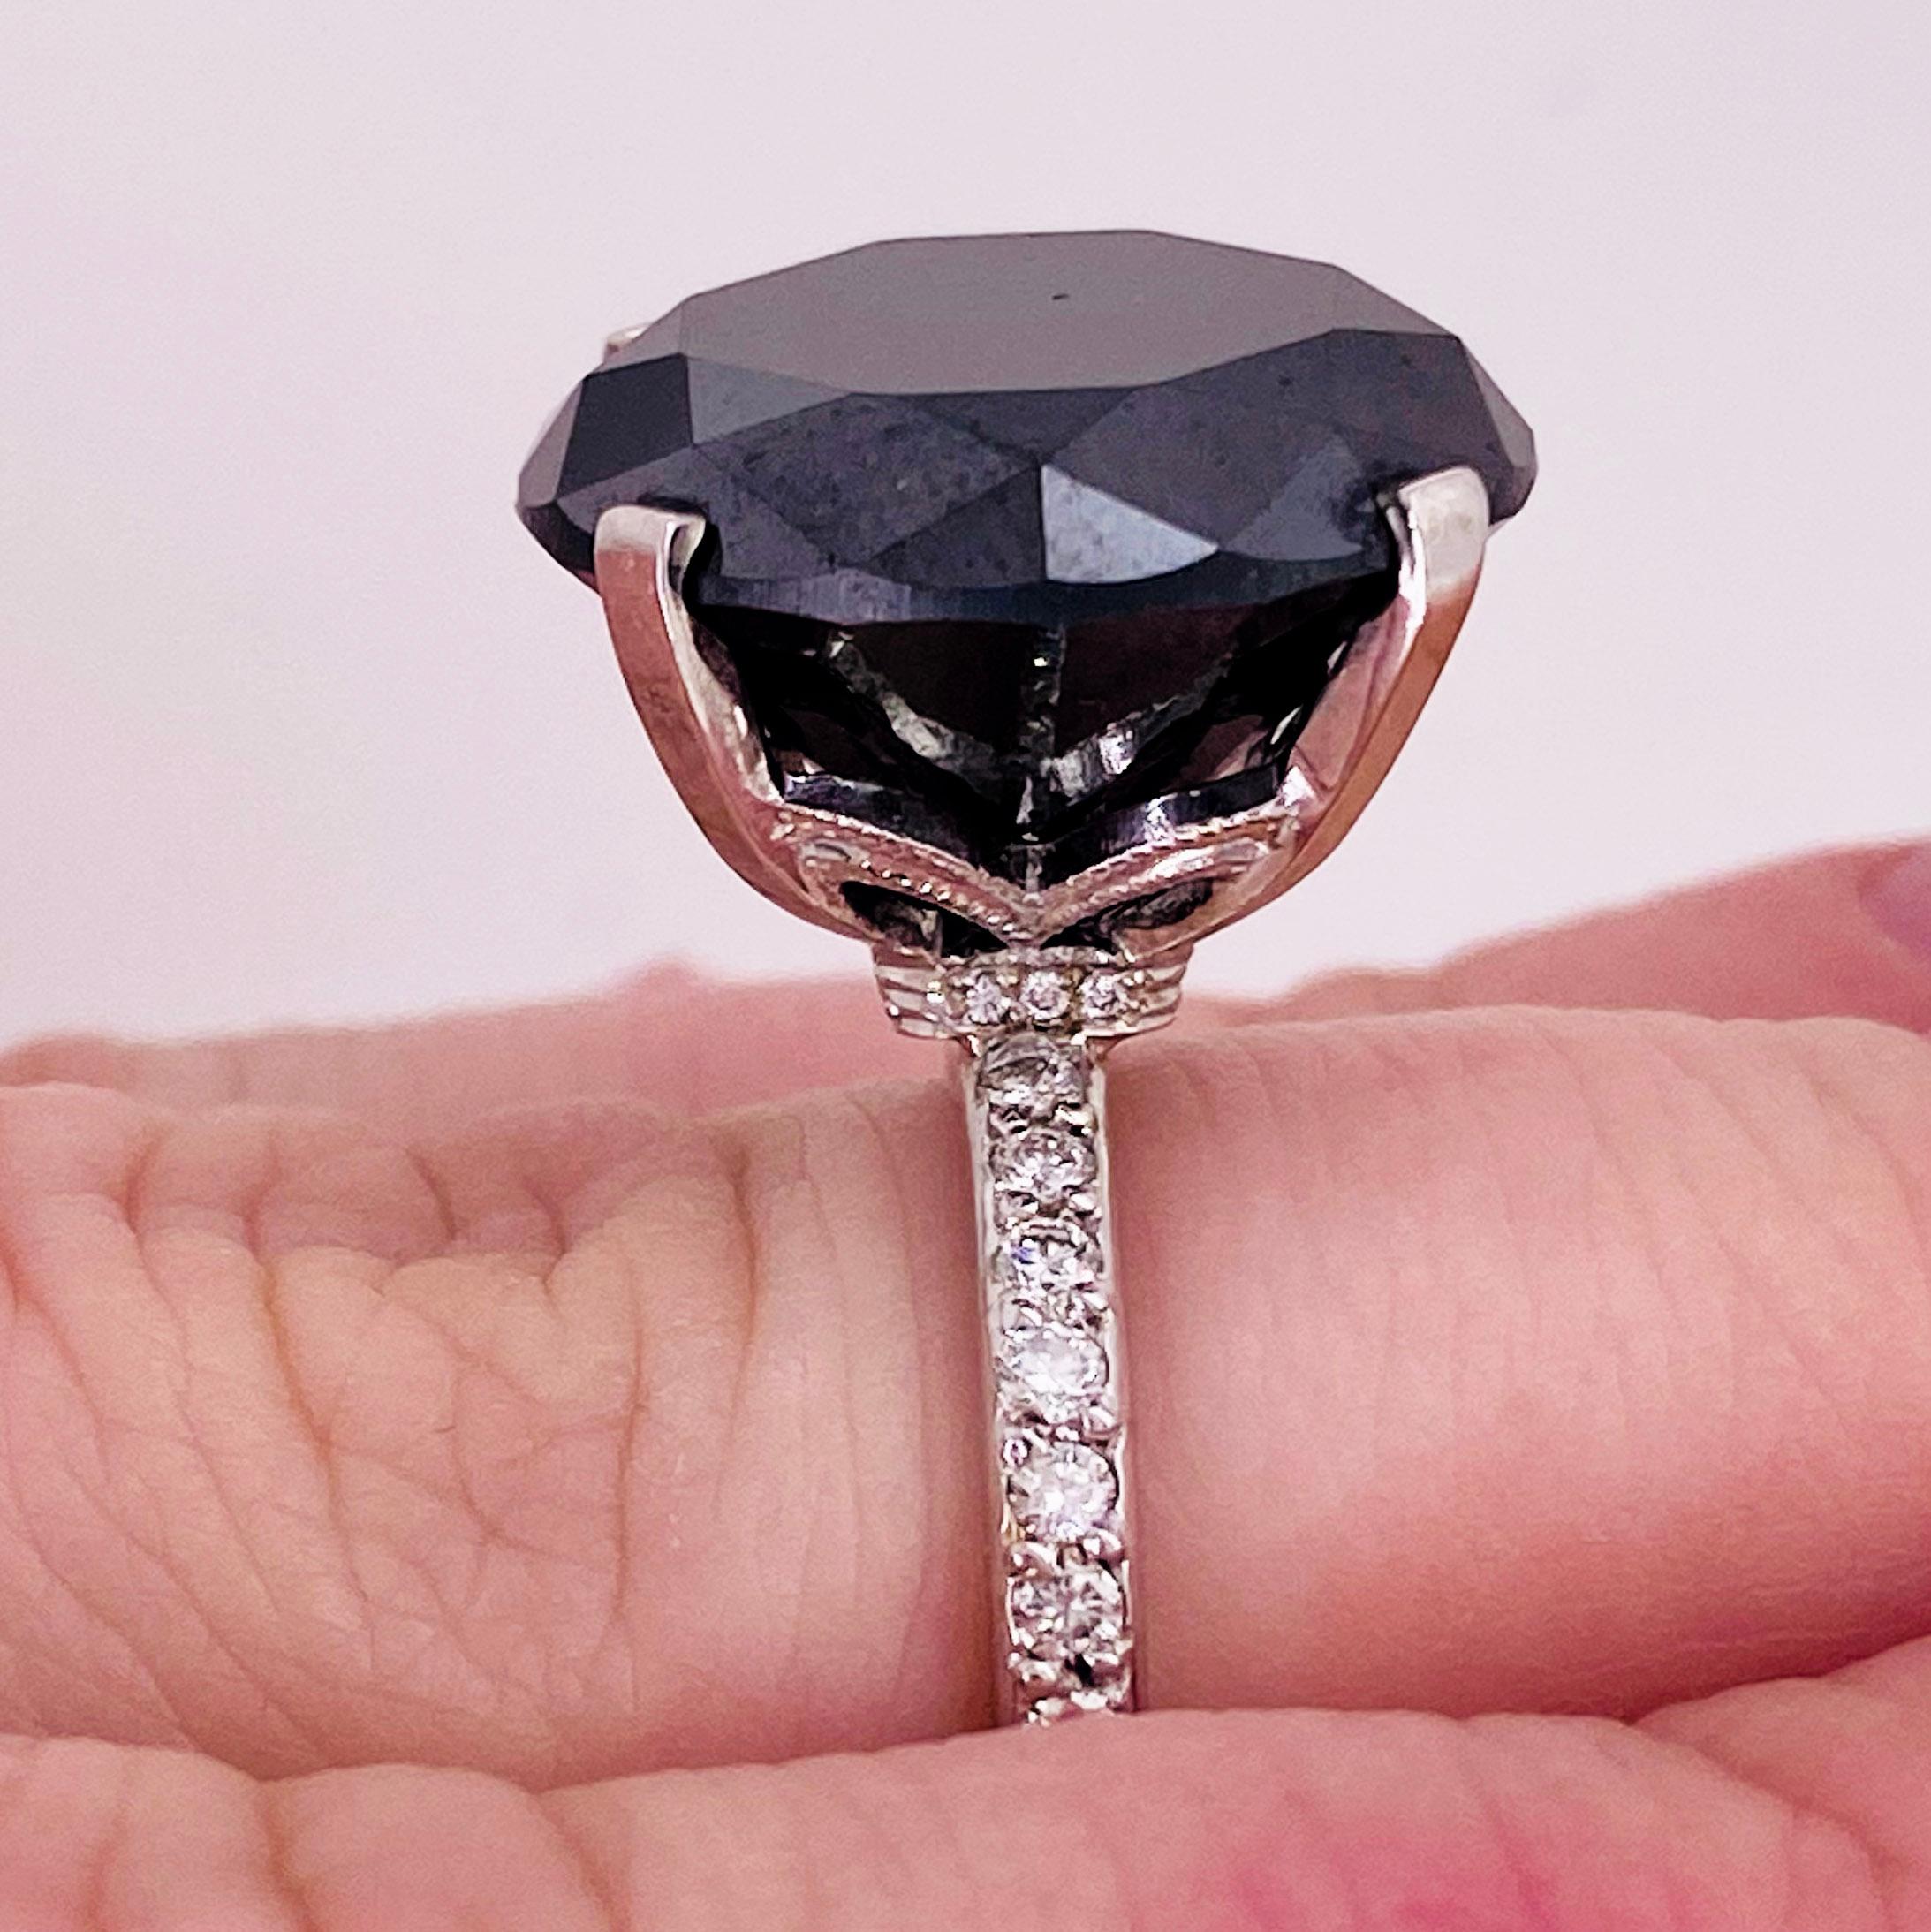 GORGEOUS, STUNNING, BREATHTAKING doesn't begin to describe the 13.96 - carat round black diamond! With great color and size this diamond will look great on anyone! This gorgeous center stone is set in a brilliant 14K white gold setting with a hidden